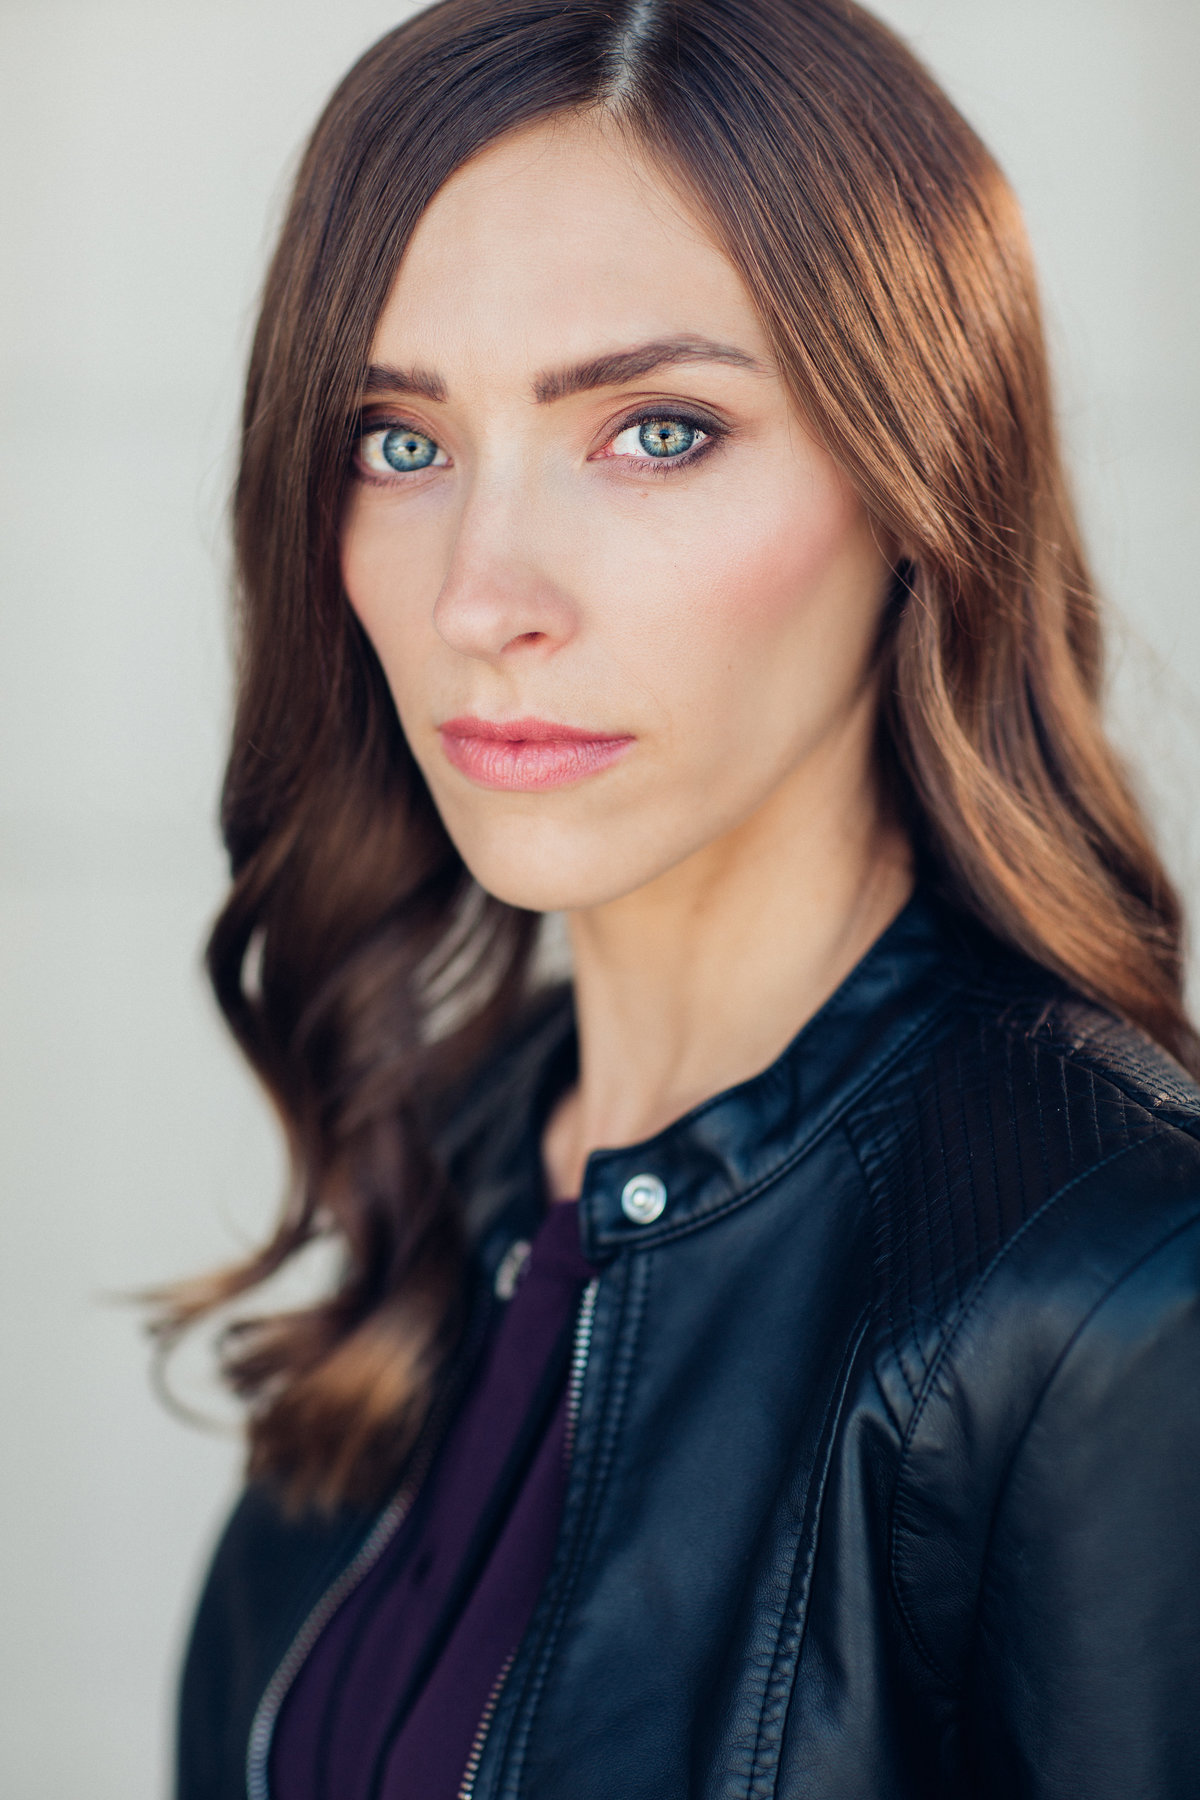 Headshot Photograph Of Young Woman In Outer Black Denim Jacket And Inner Violet Shirt Los Angeles